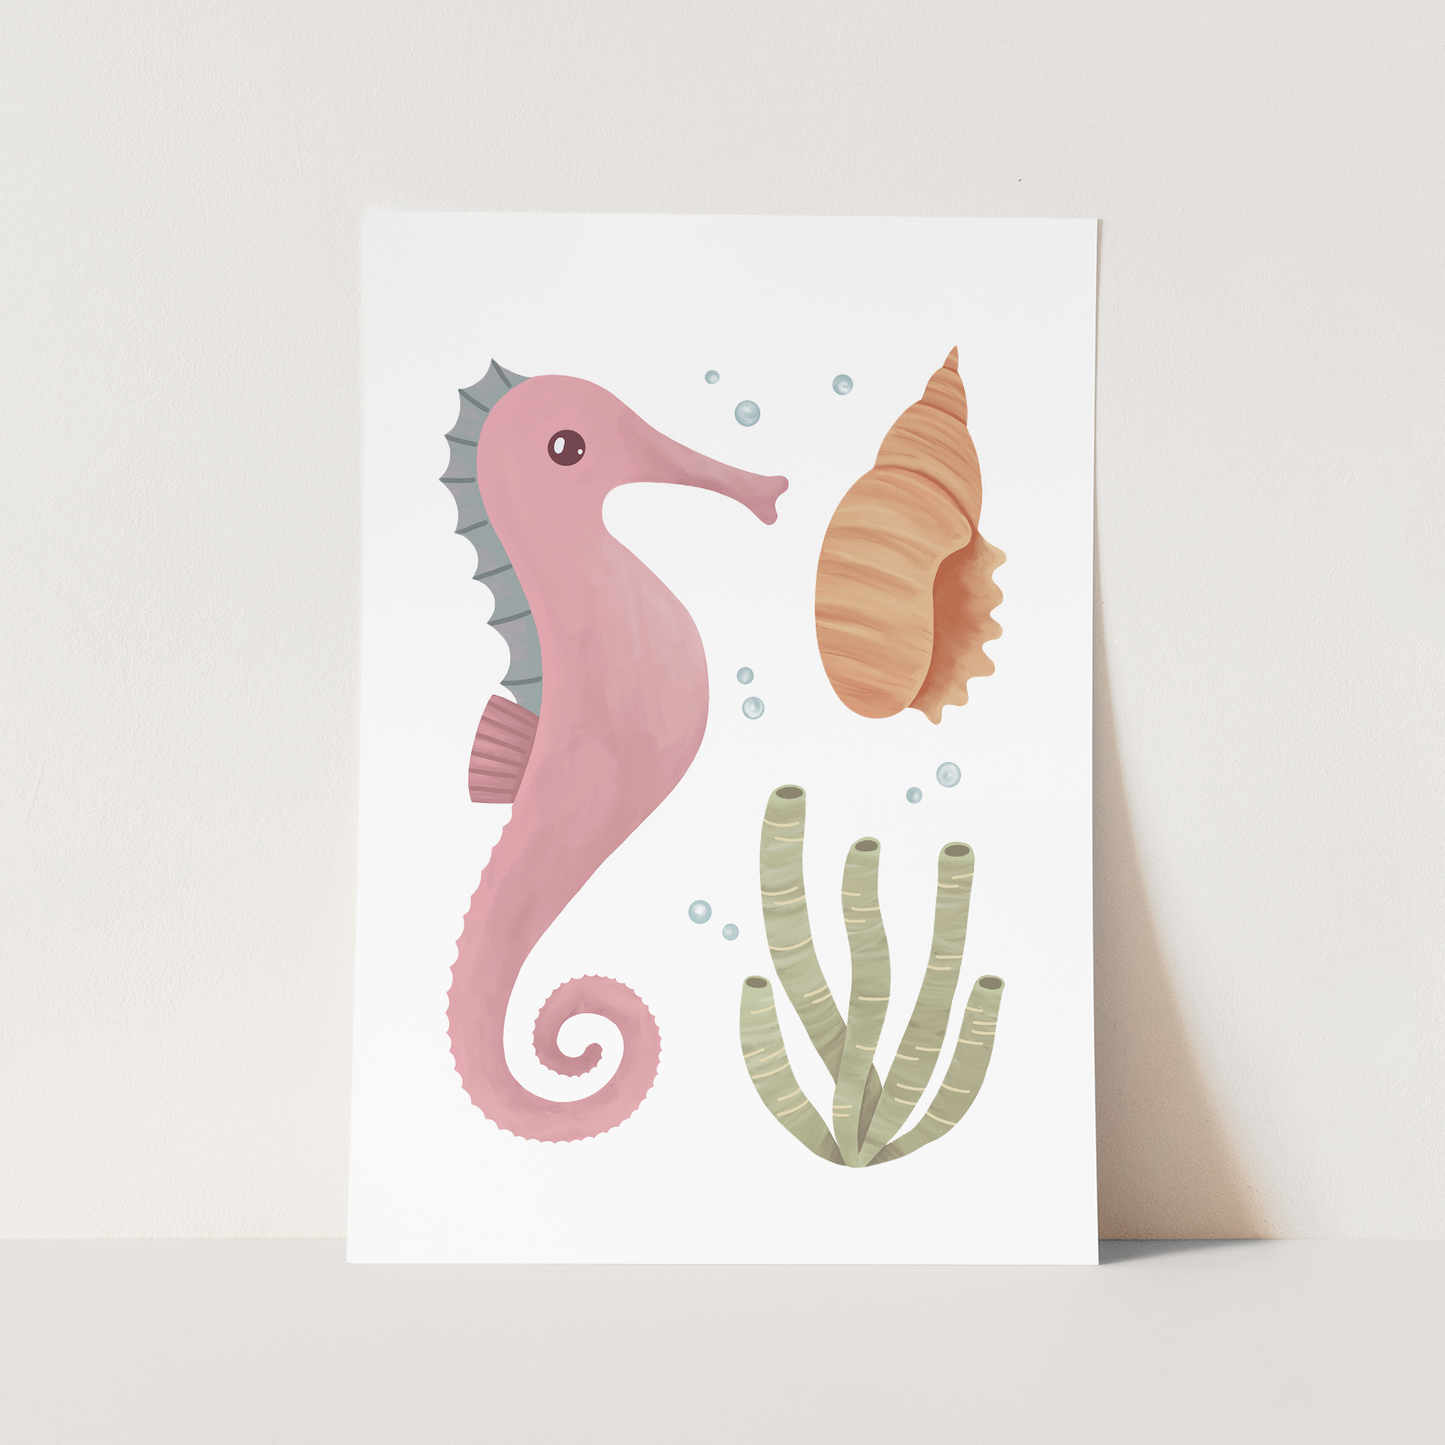 Seahorse Art Print by Kid of the Village (6 Sizes Available)